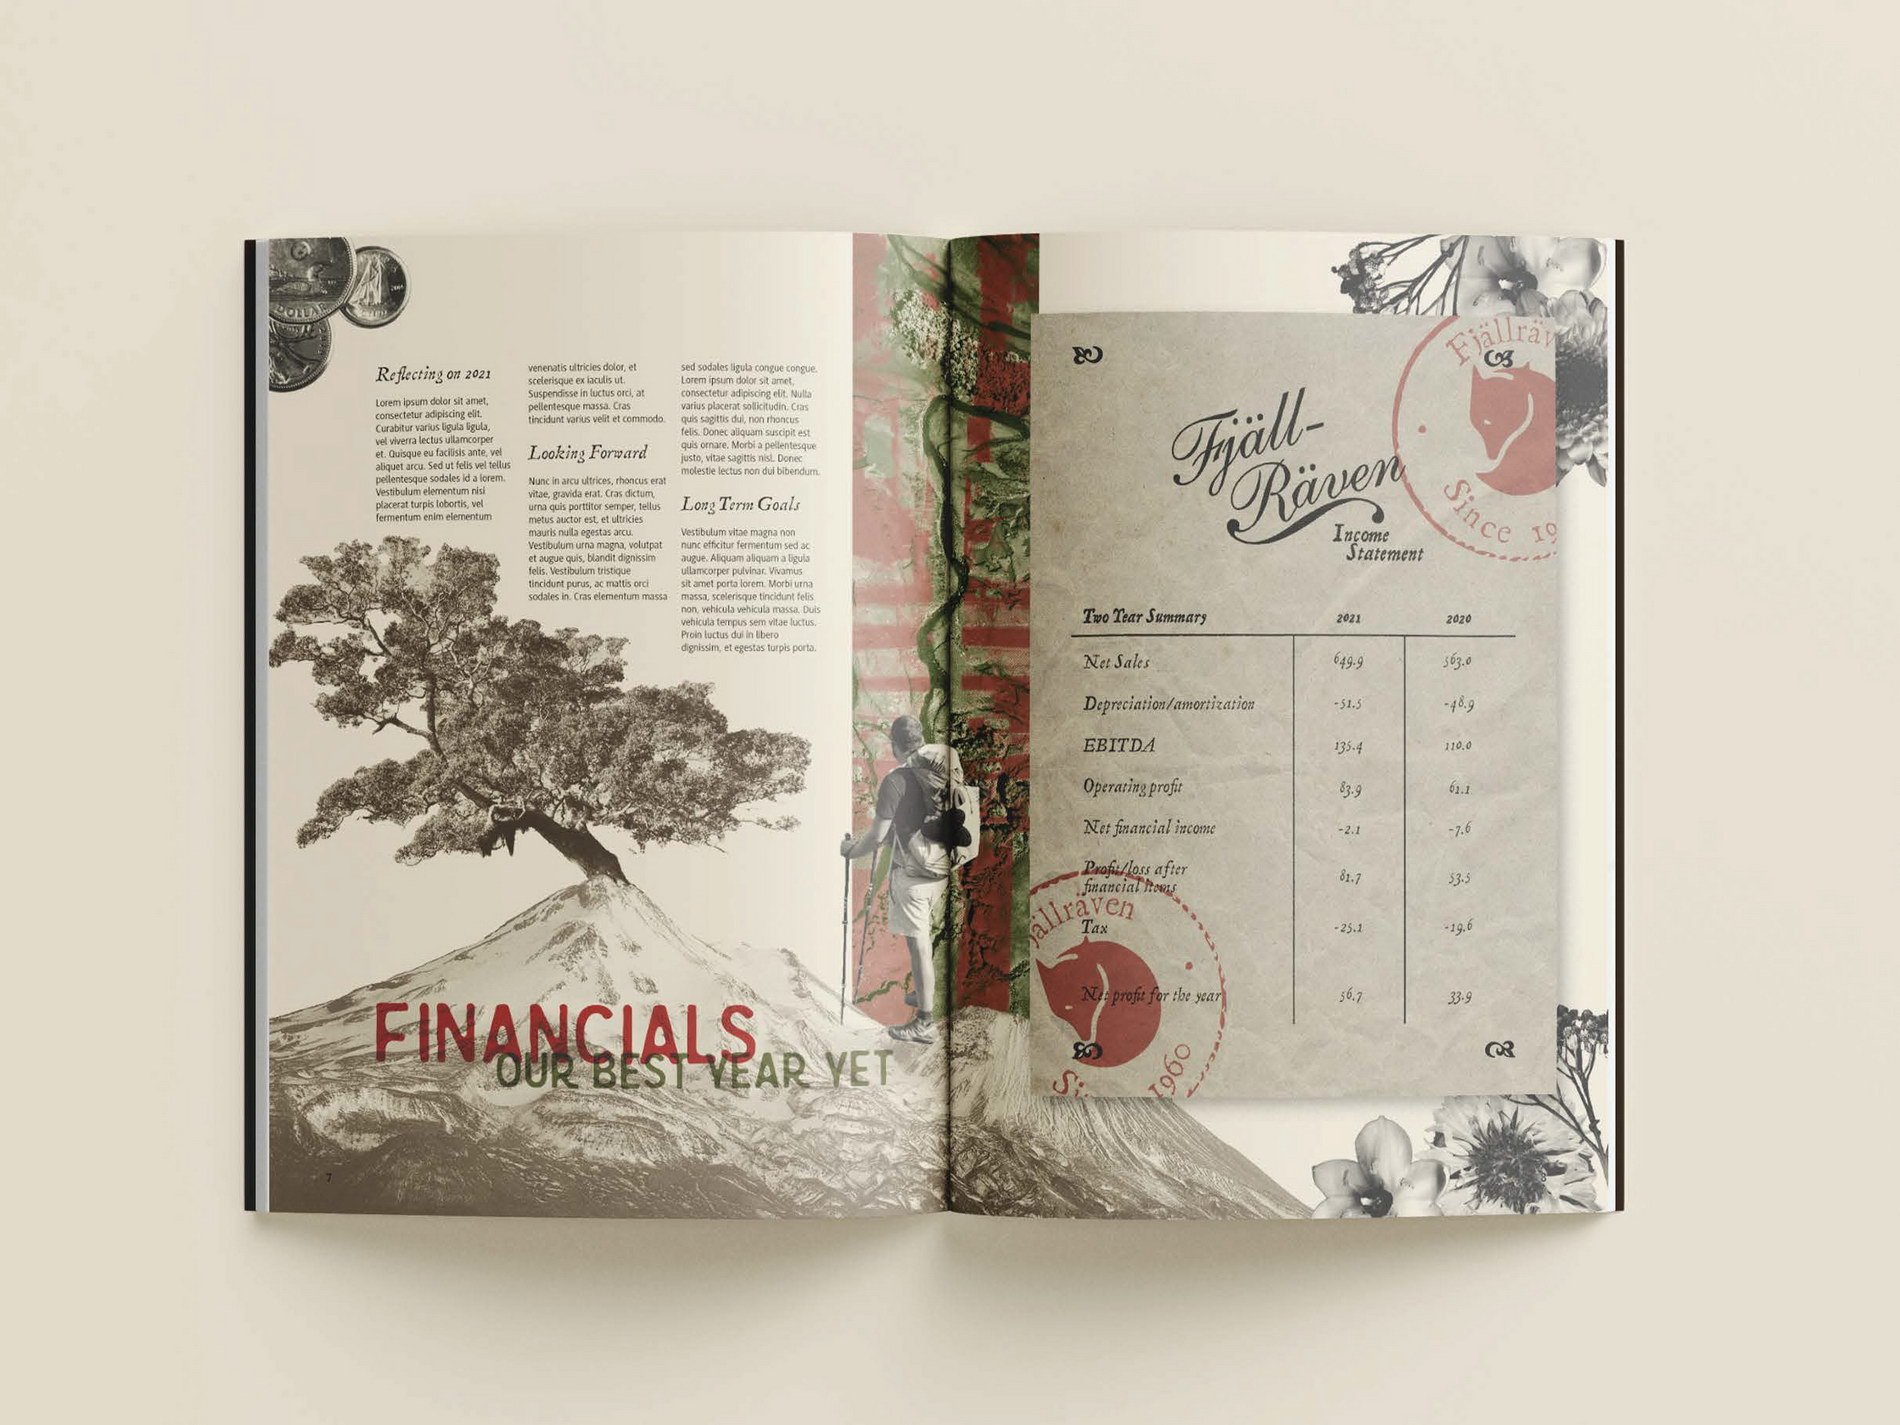 angelica-blanch--fjallraven--annual-report--community-report--communication-design--information-design--advertising--design-in-business-and-marketing--capilano-university-idea-school-of-design-5.jpg